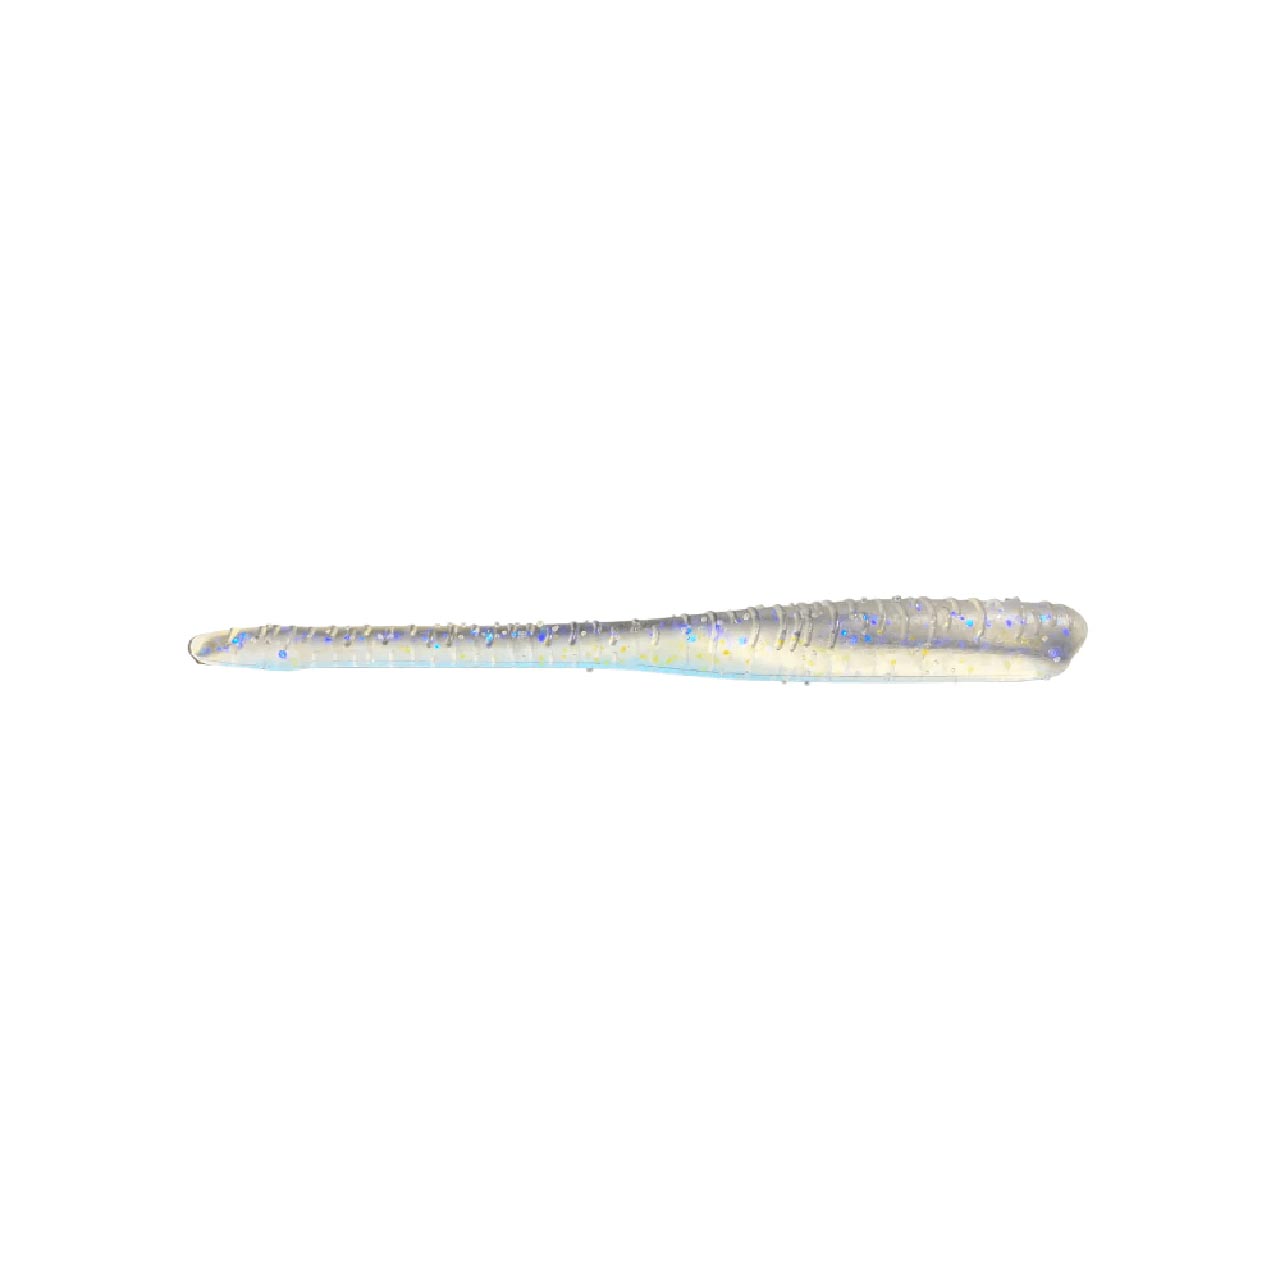 Great Lakes Finesse Drop Worm - FishUSA